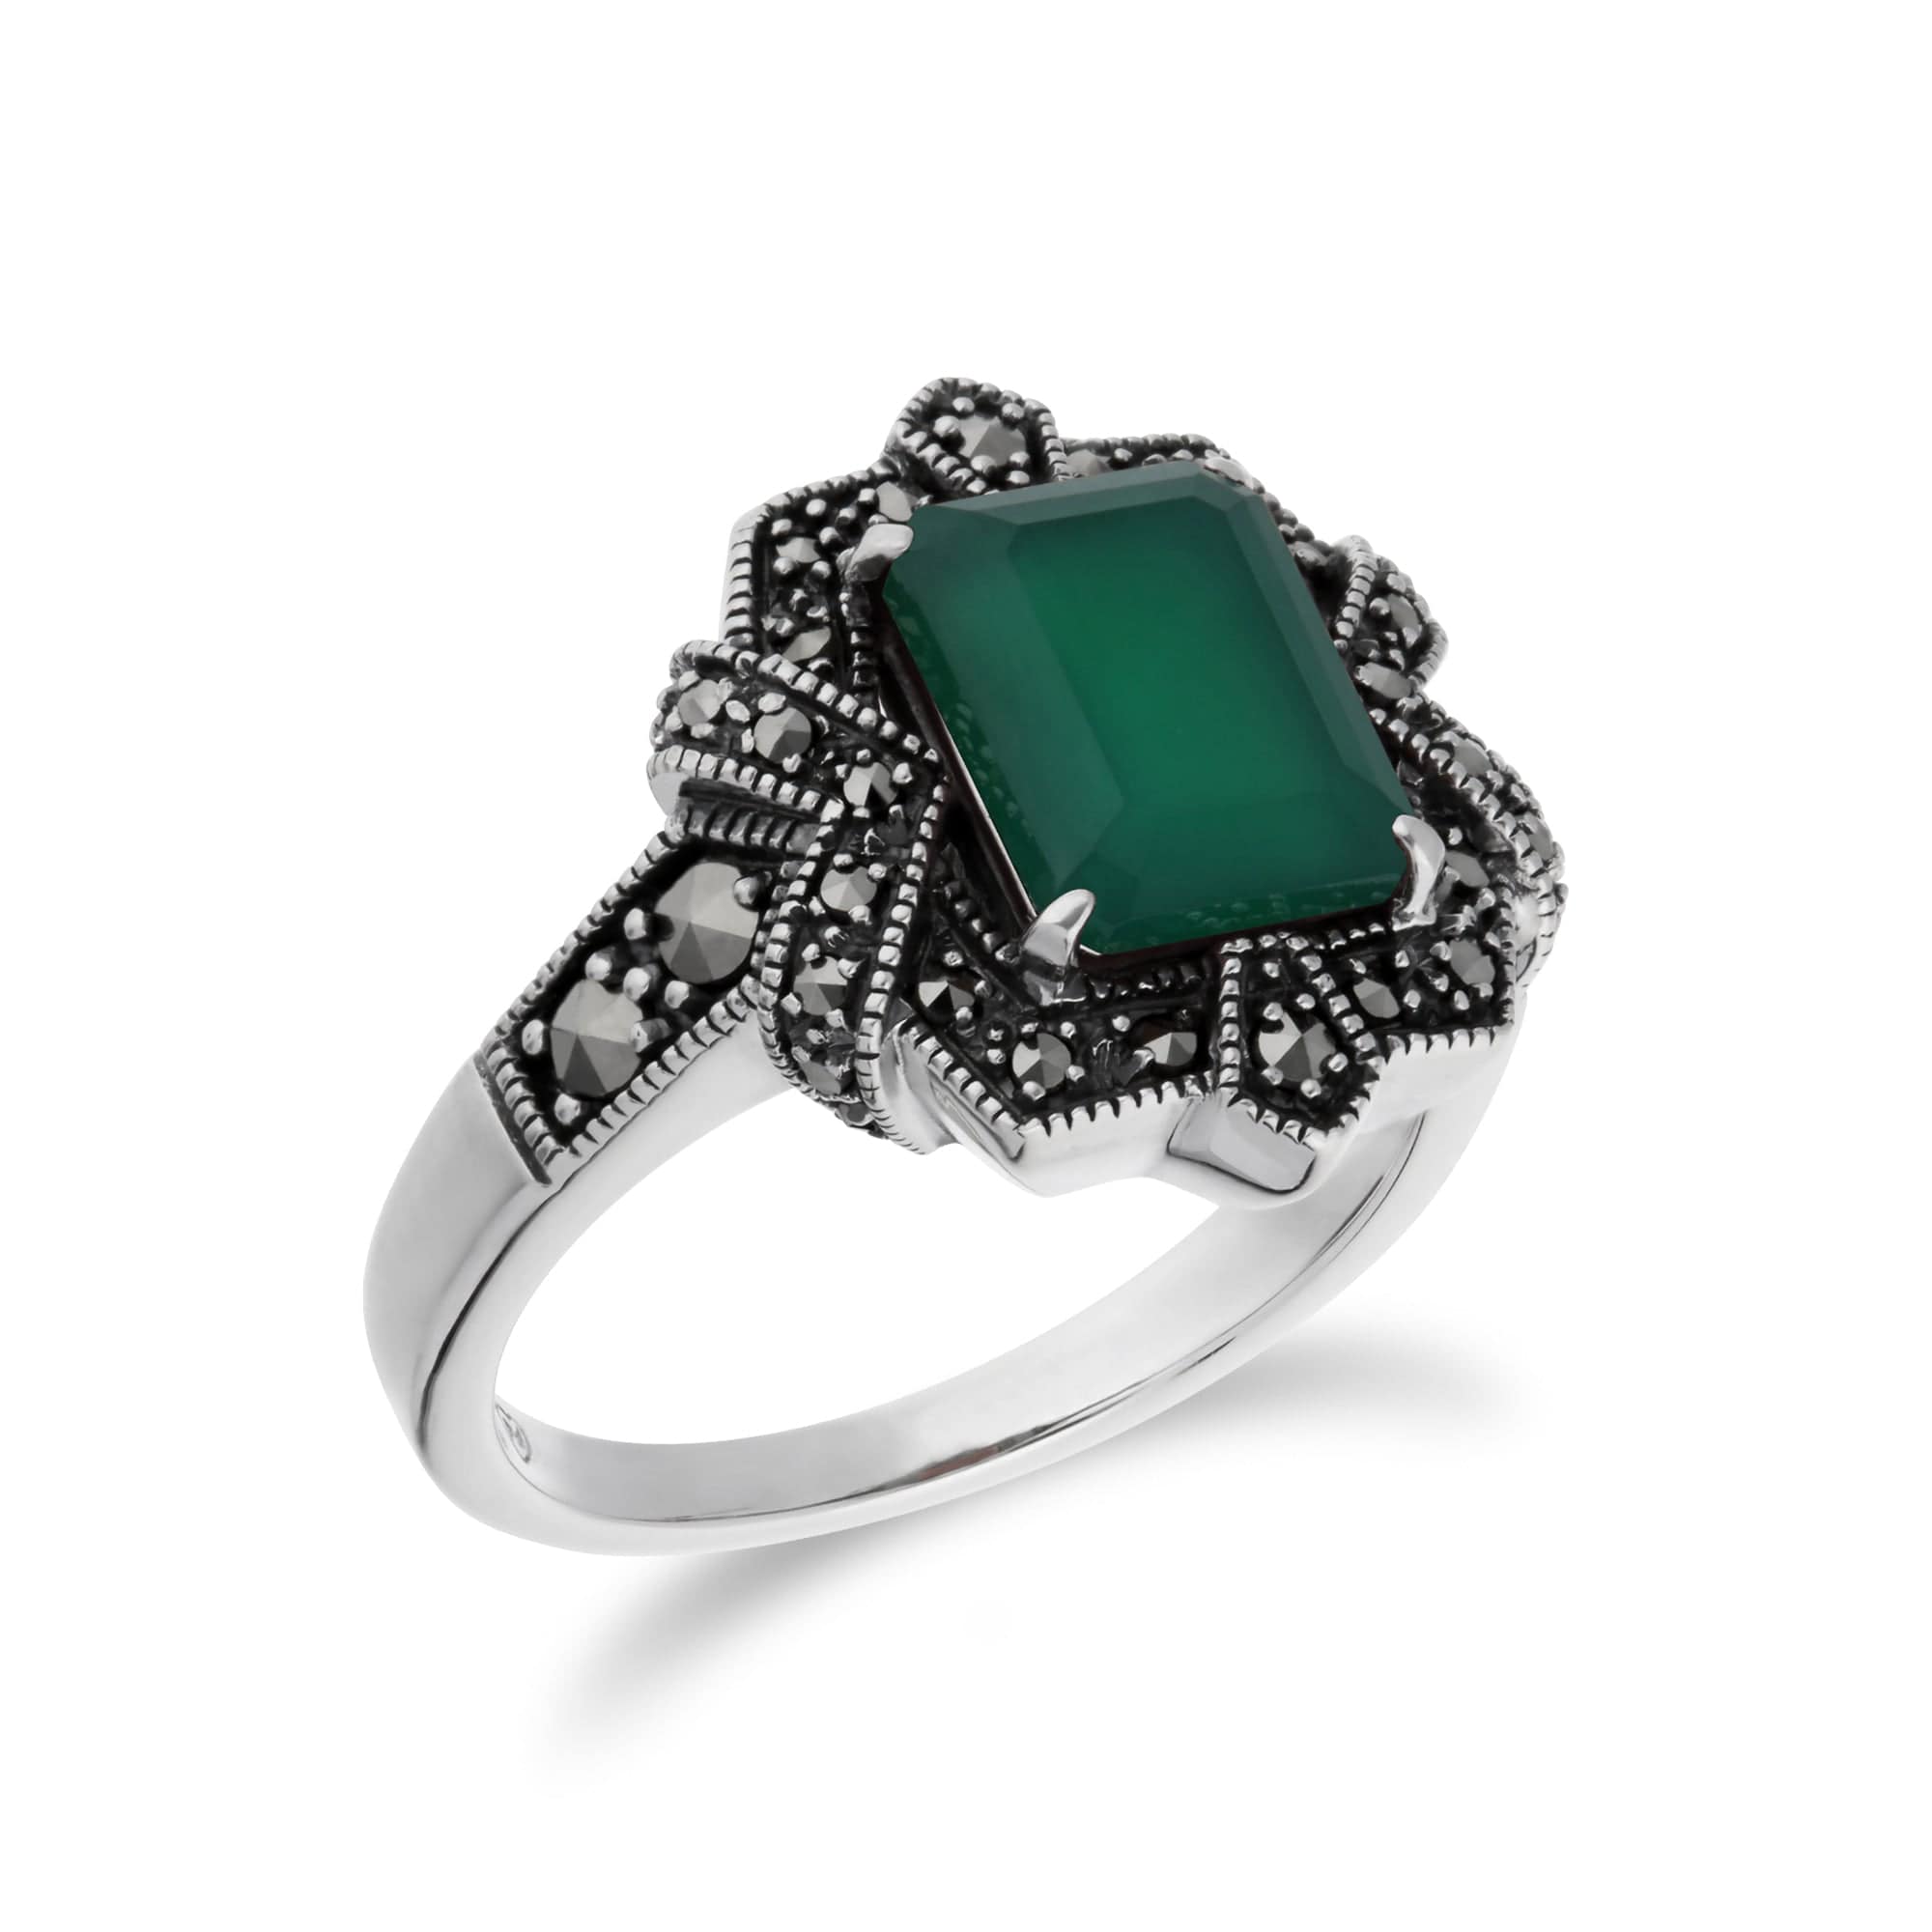 Art Deco Style Baguette Green Chalcedony & Marcasite Ring in 925 Sterling Silver - Gemondo